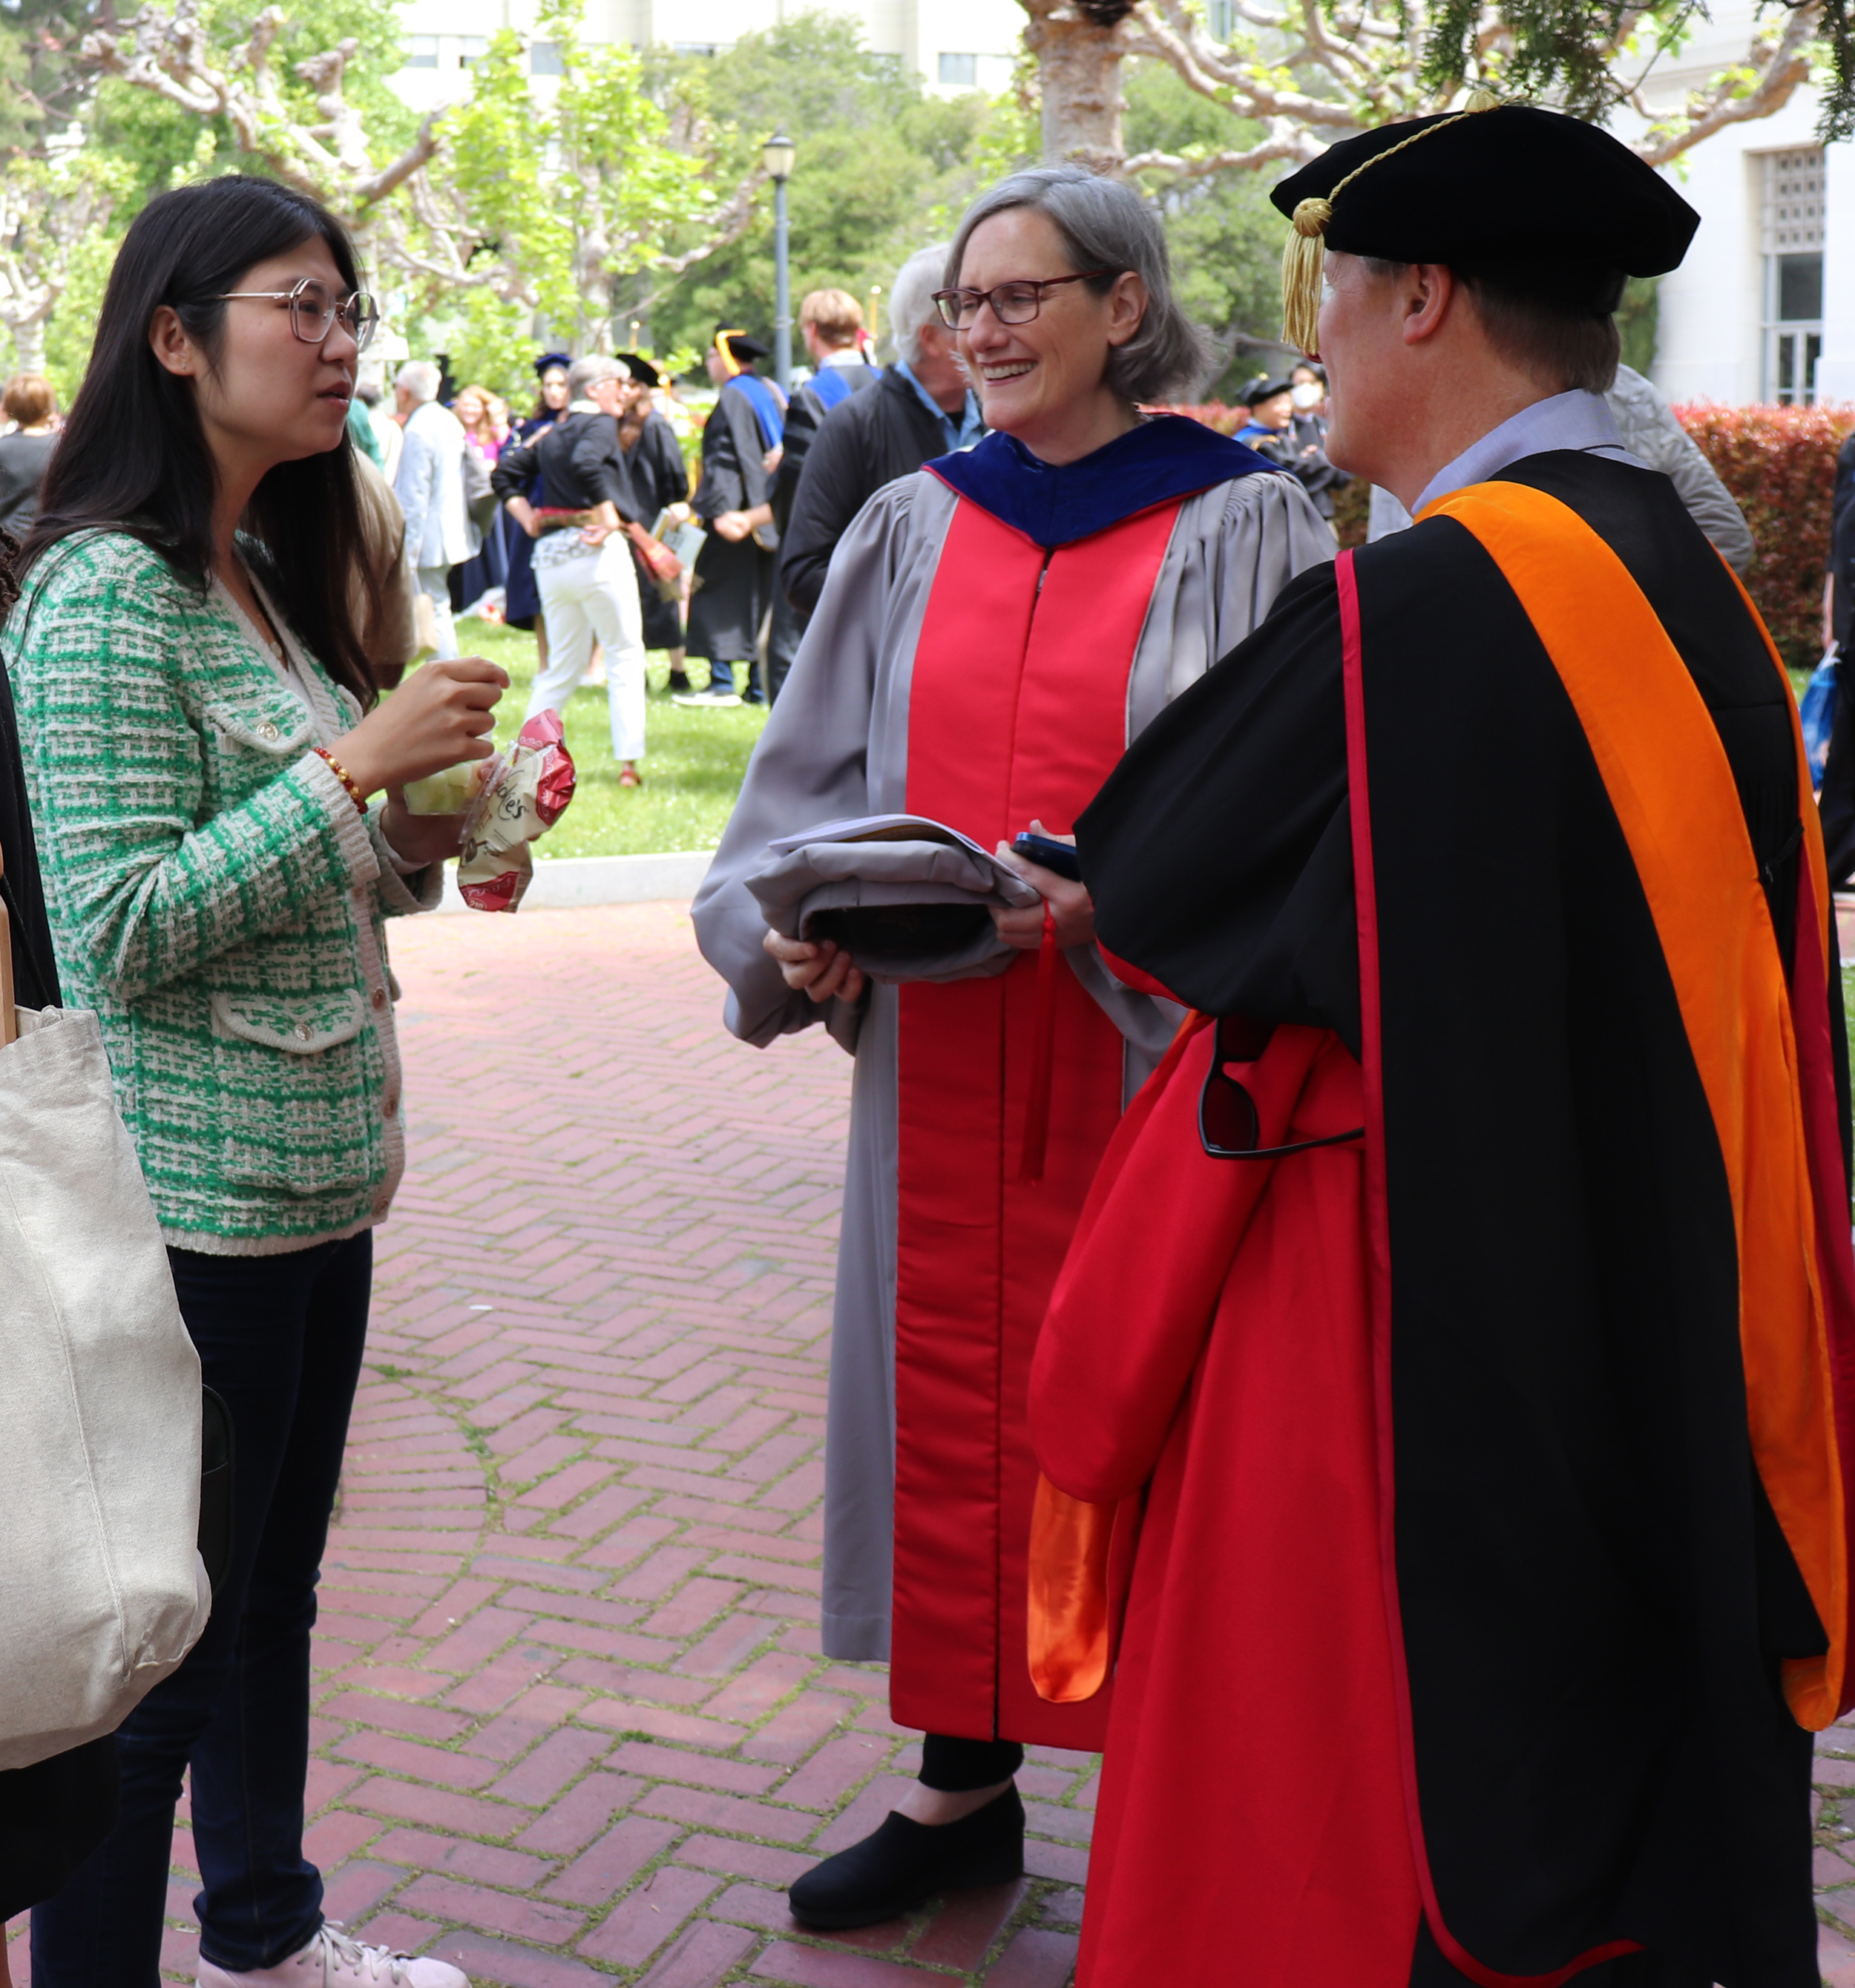 Current doctoral student Zhe Fu celebrates graduation with Professor Joan Walker and Professor Mark Stacey